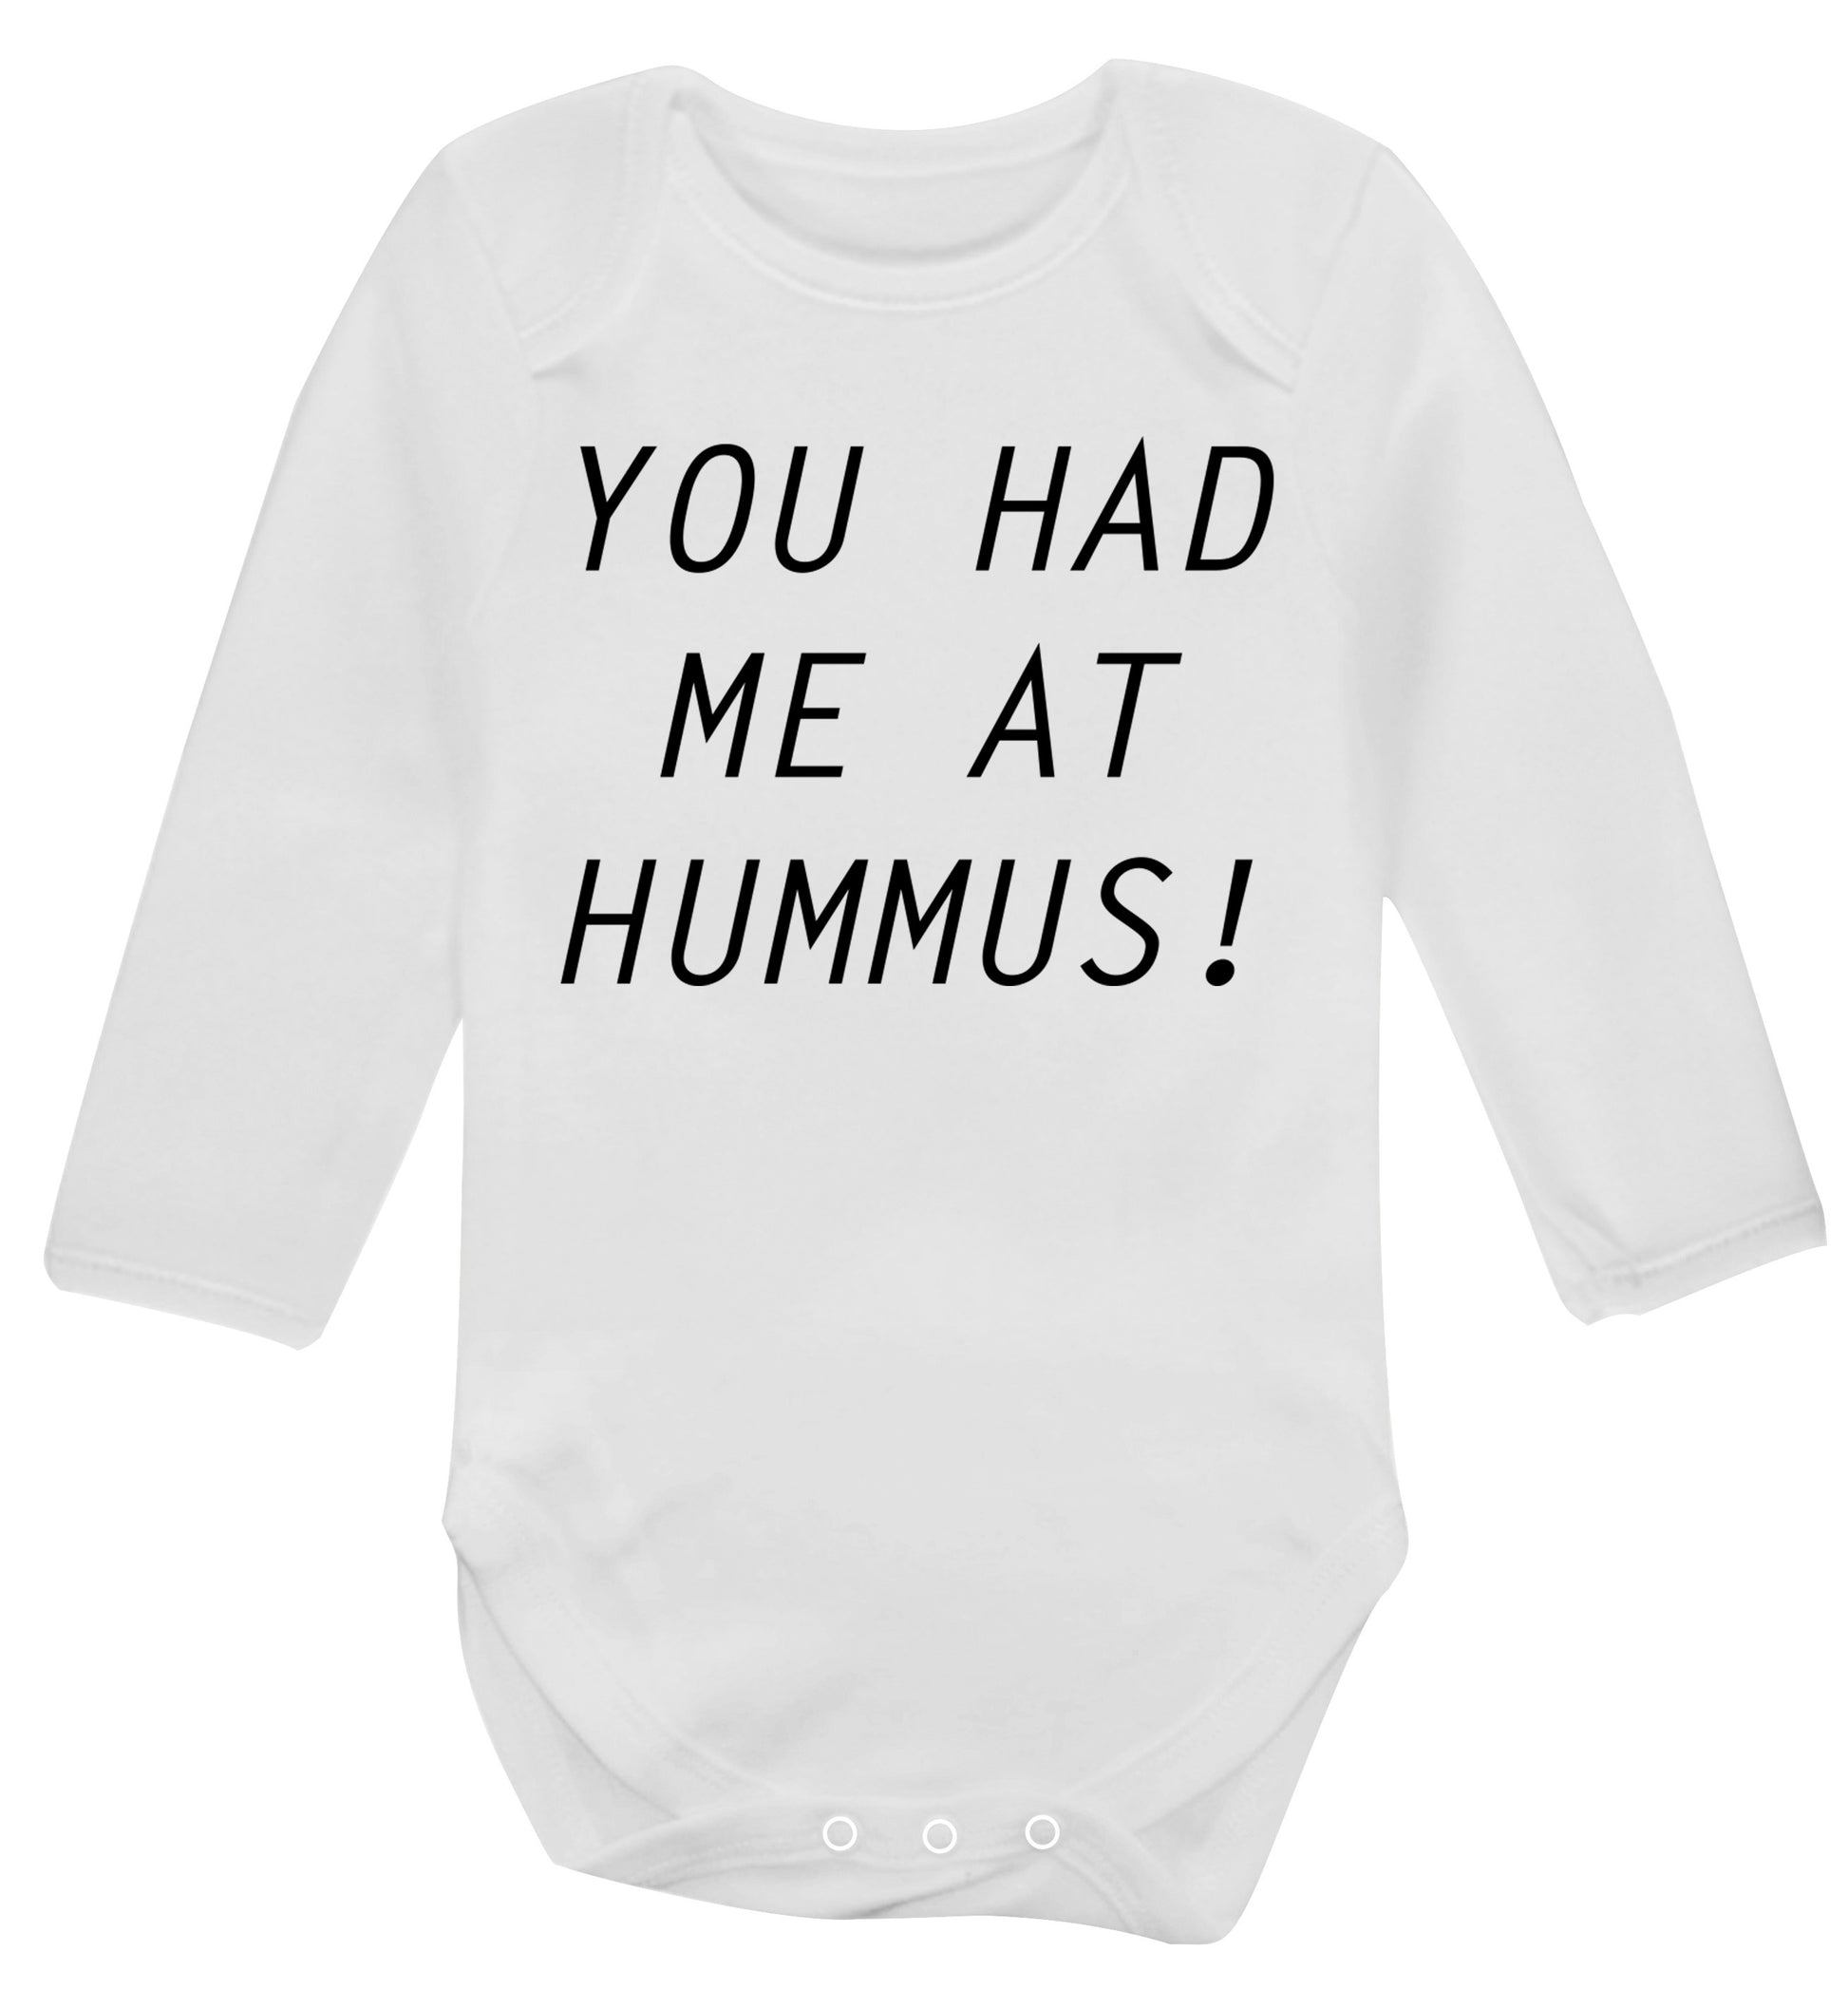 You had me at hummus Baby Vest long sleeved white 6-12 months